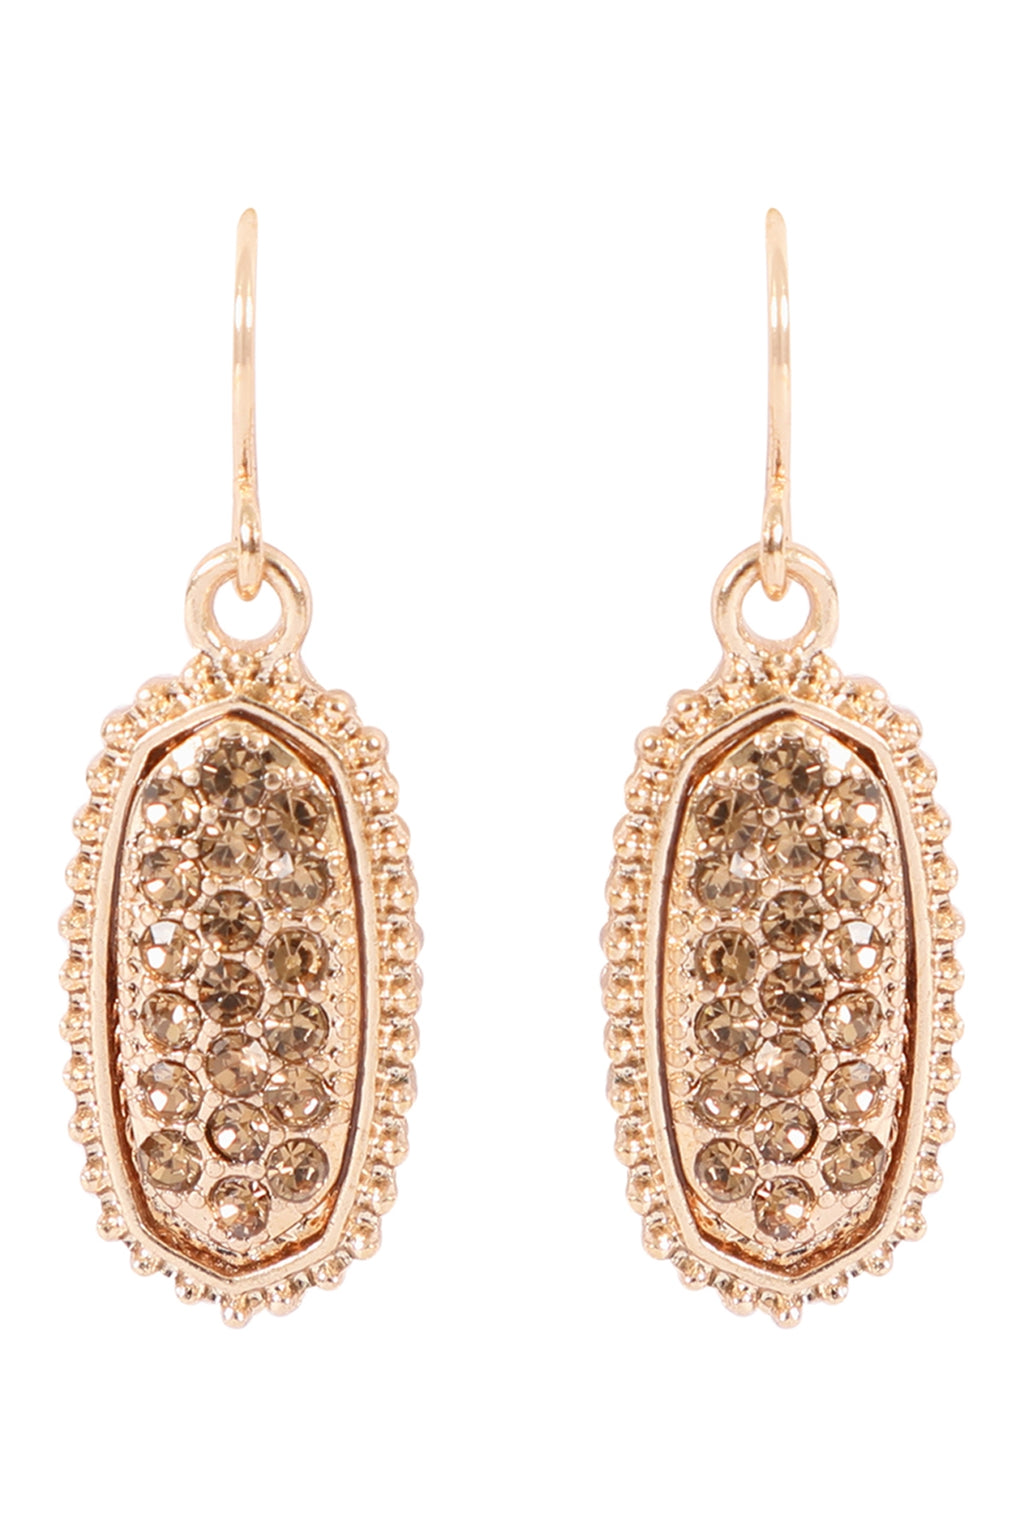 Gold Topaz Texture Pave Rhinestone Classic Earrings - Pack of 6